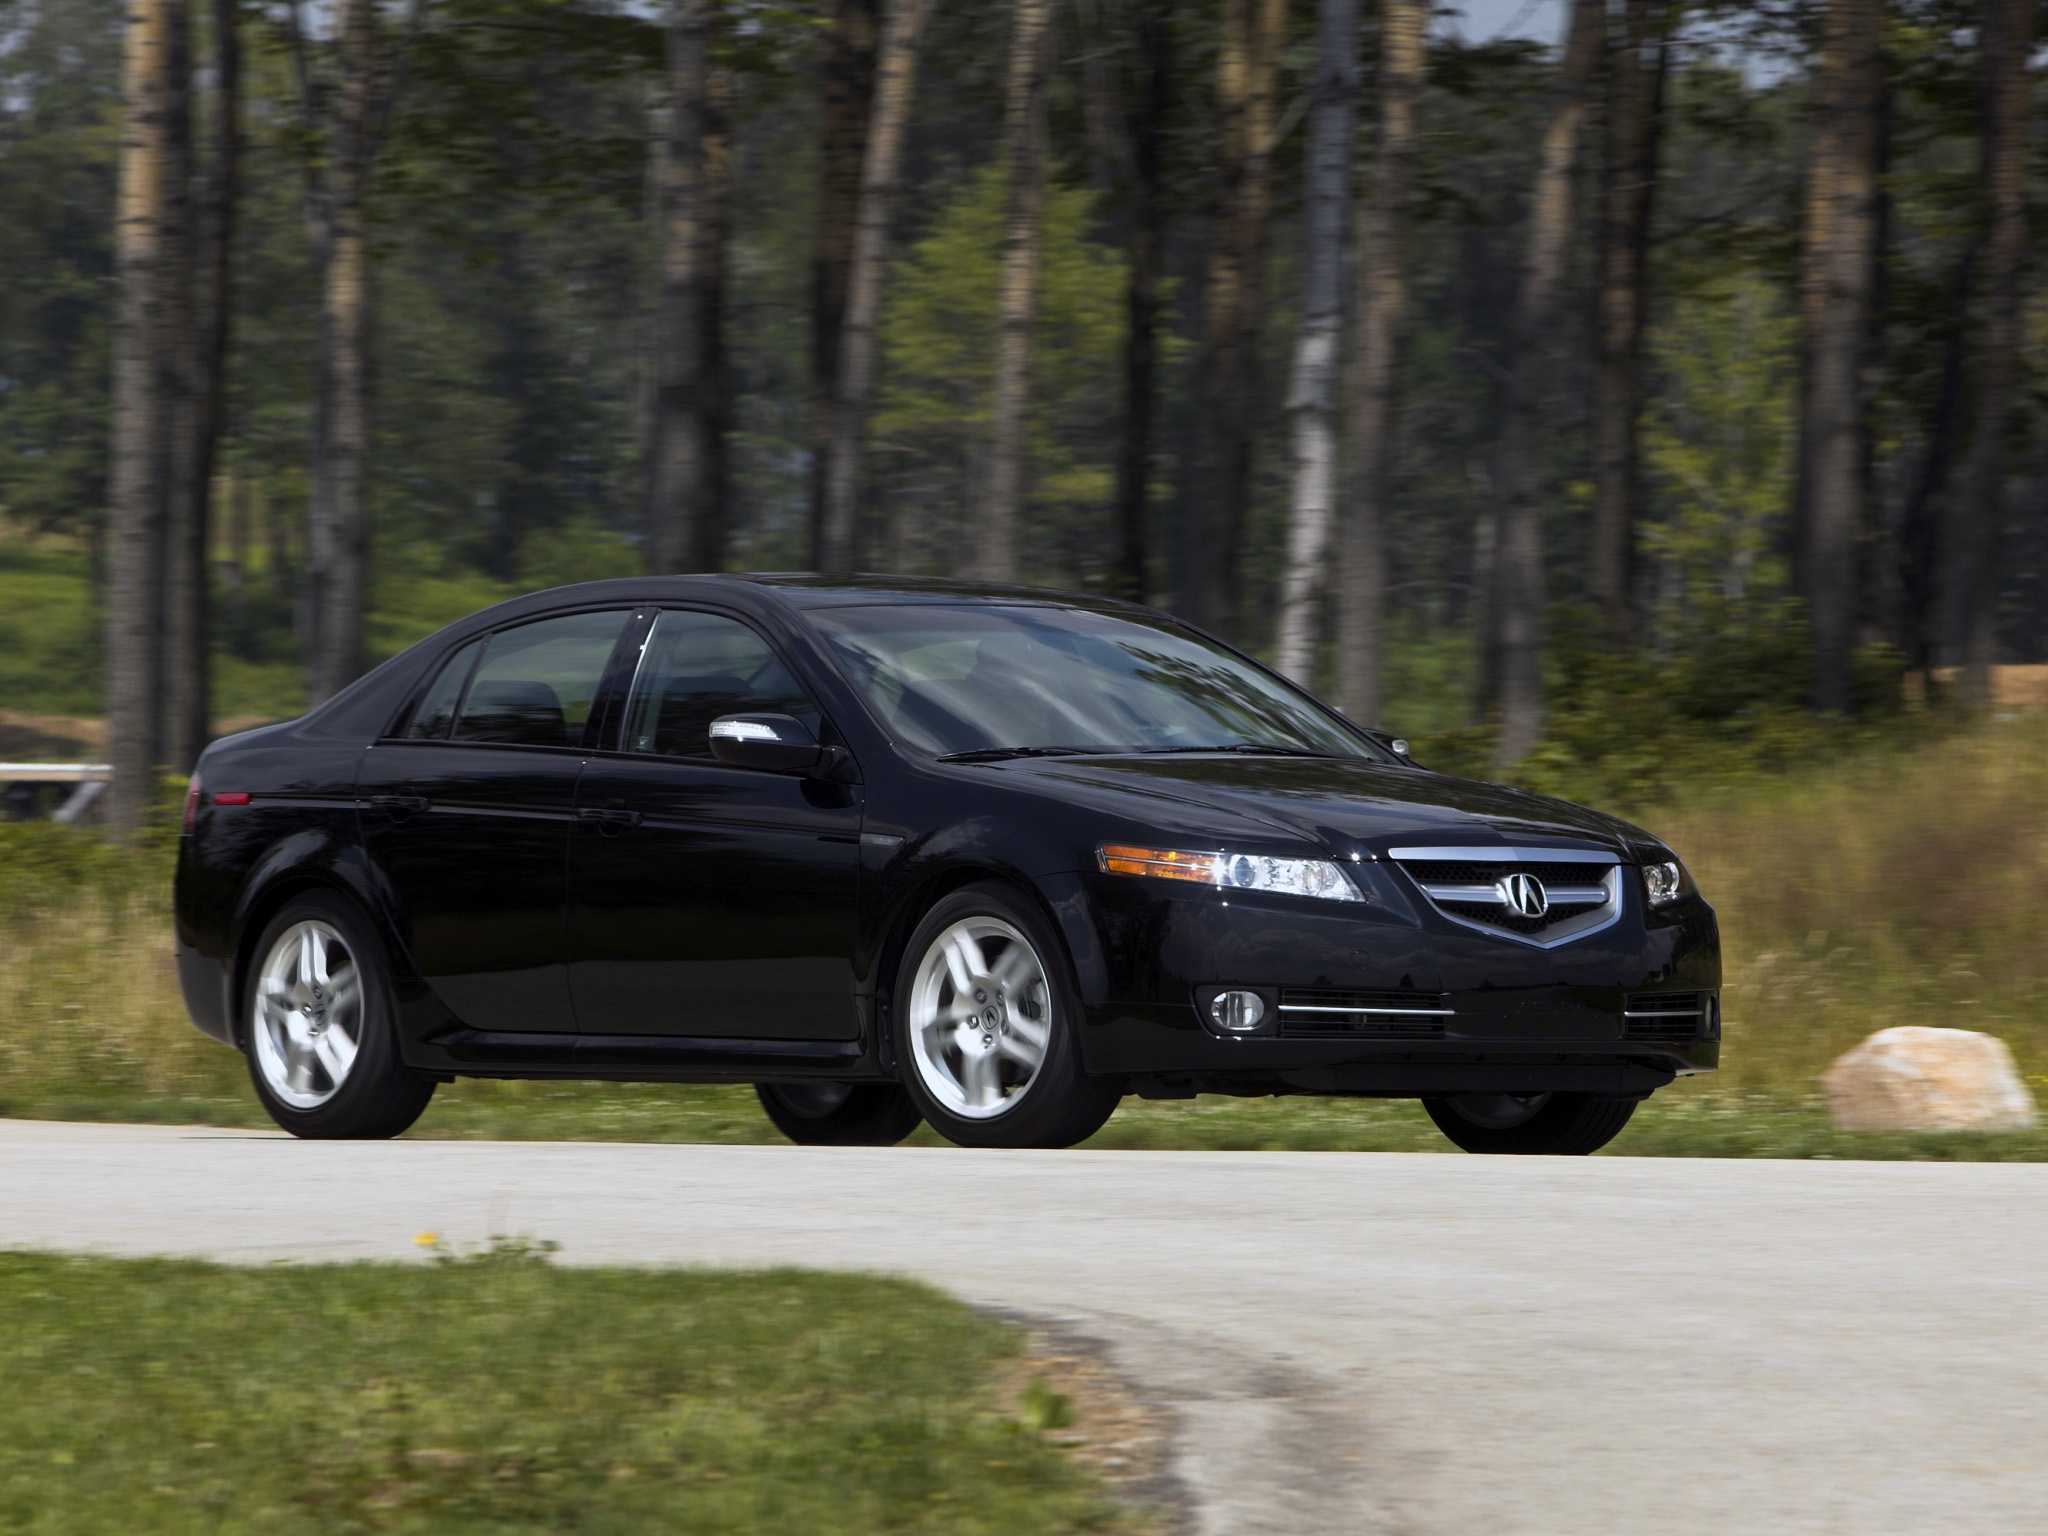 auto, nature, grass, acura, cars, black, forest, asphalt, side view, style, akura, tl, 2007